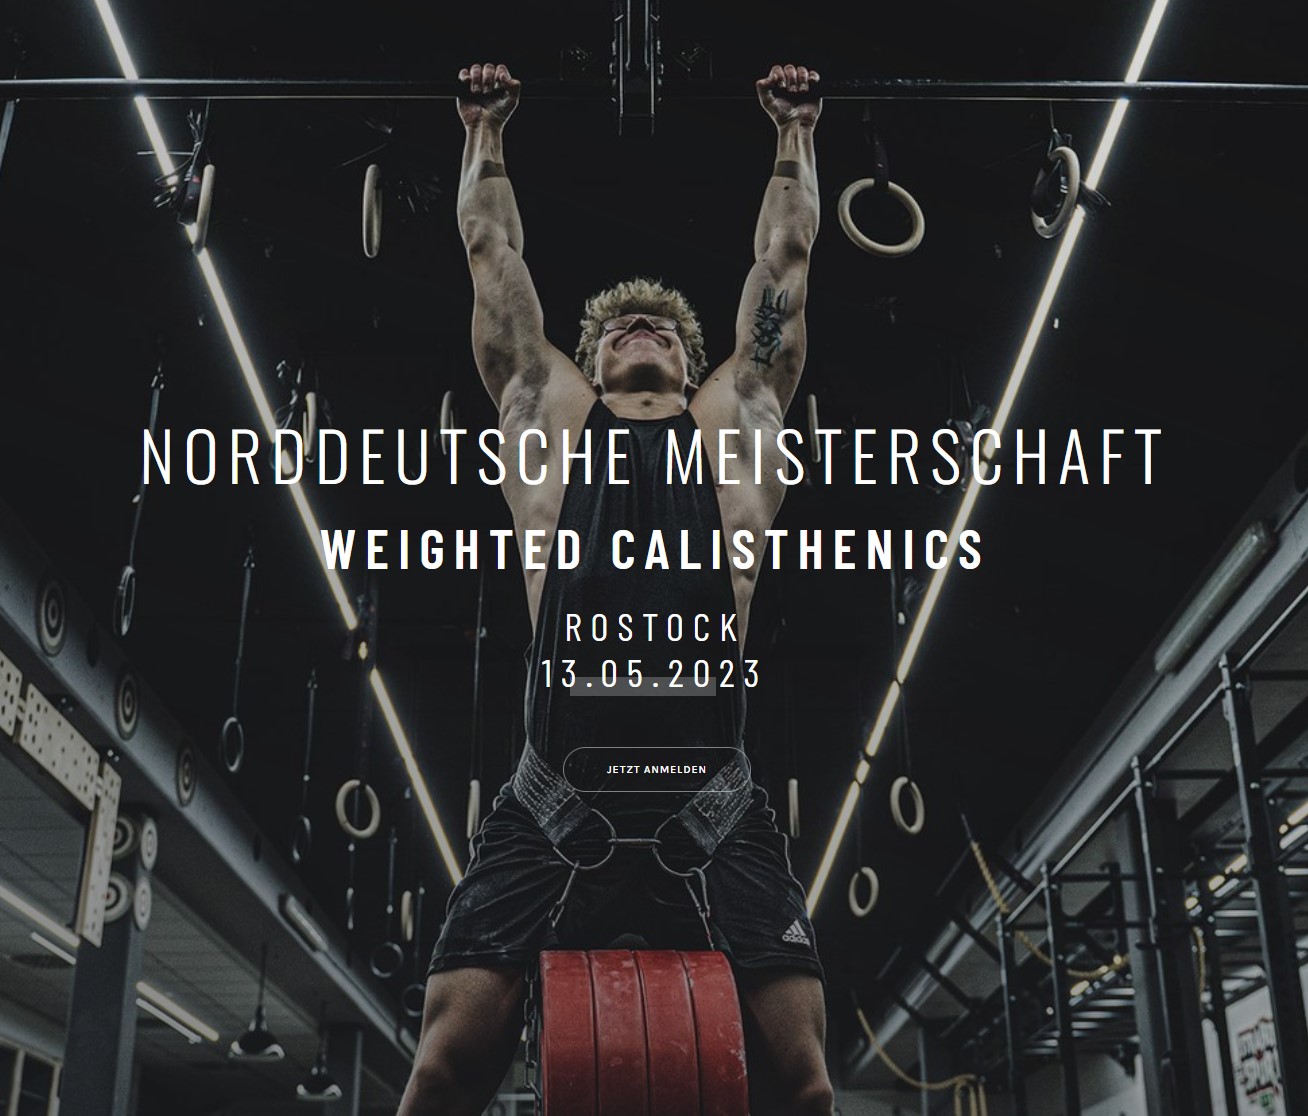 You are currently viewing Norddeutsche Meisterschaft Weighted Calisthenics Rostock 2023